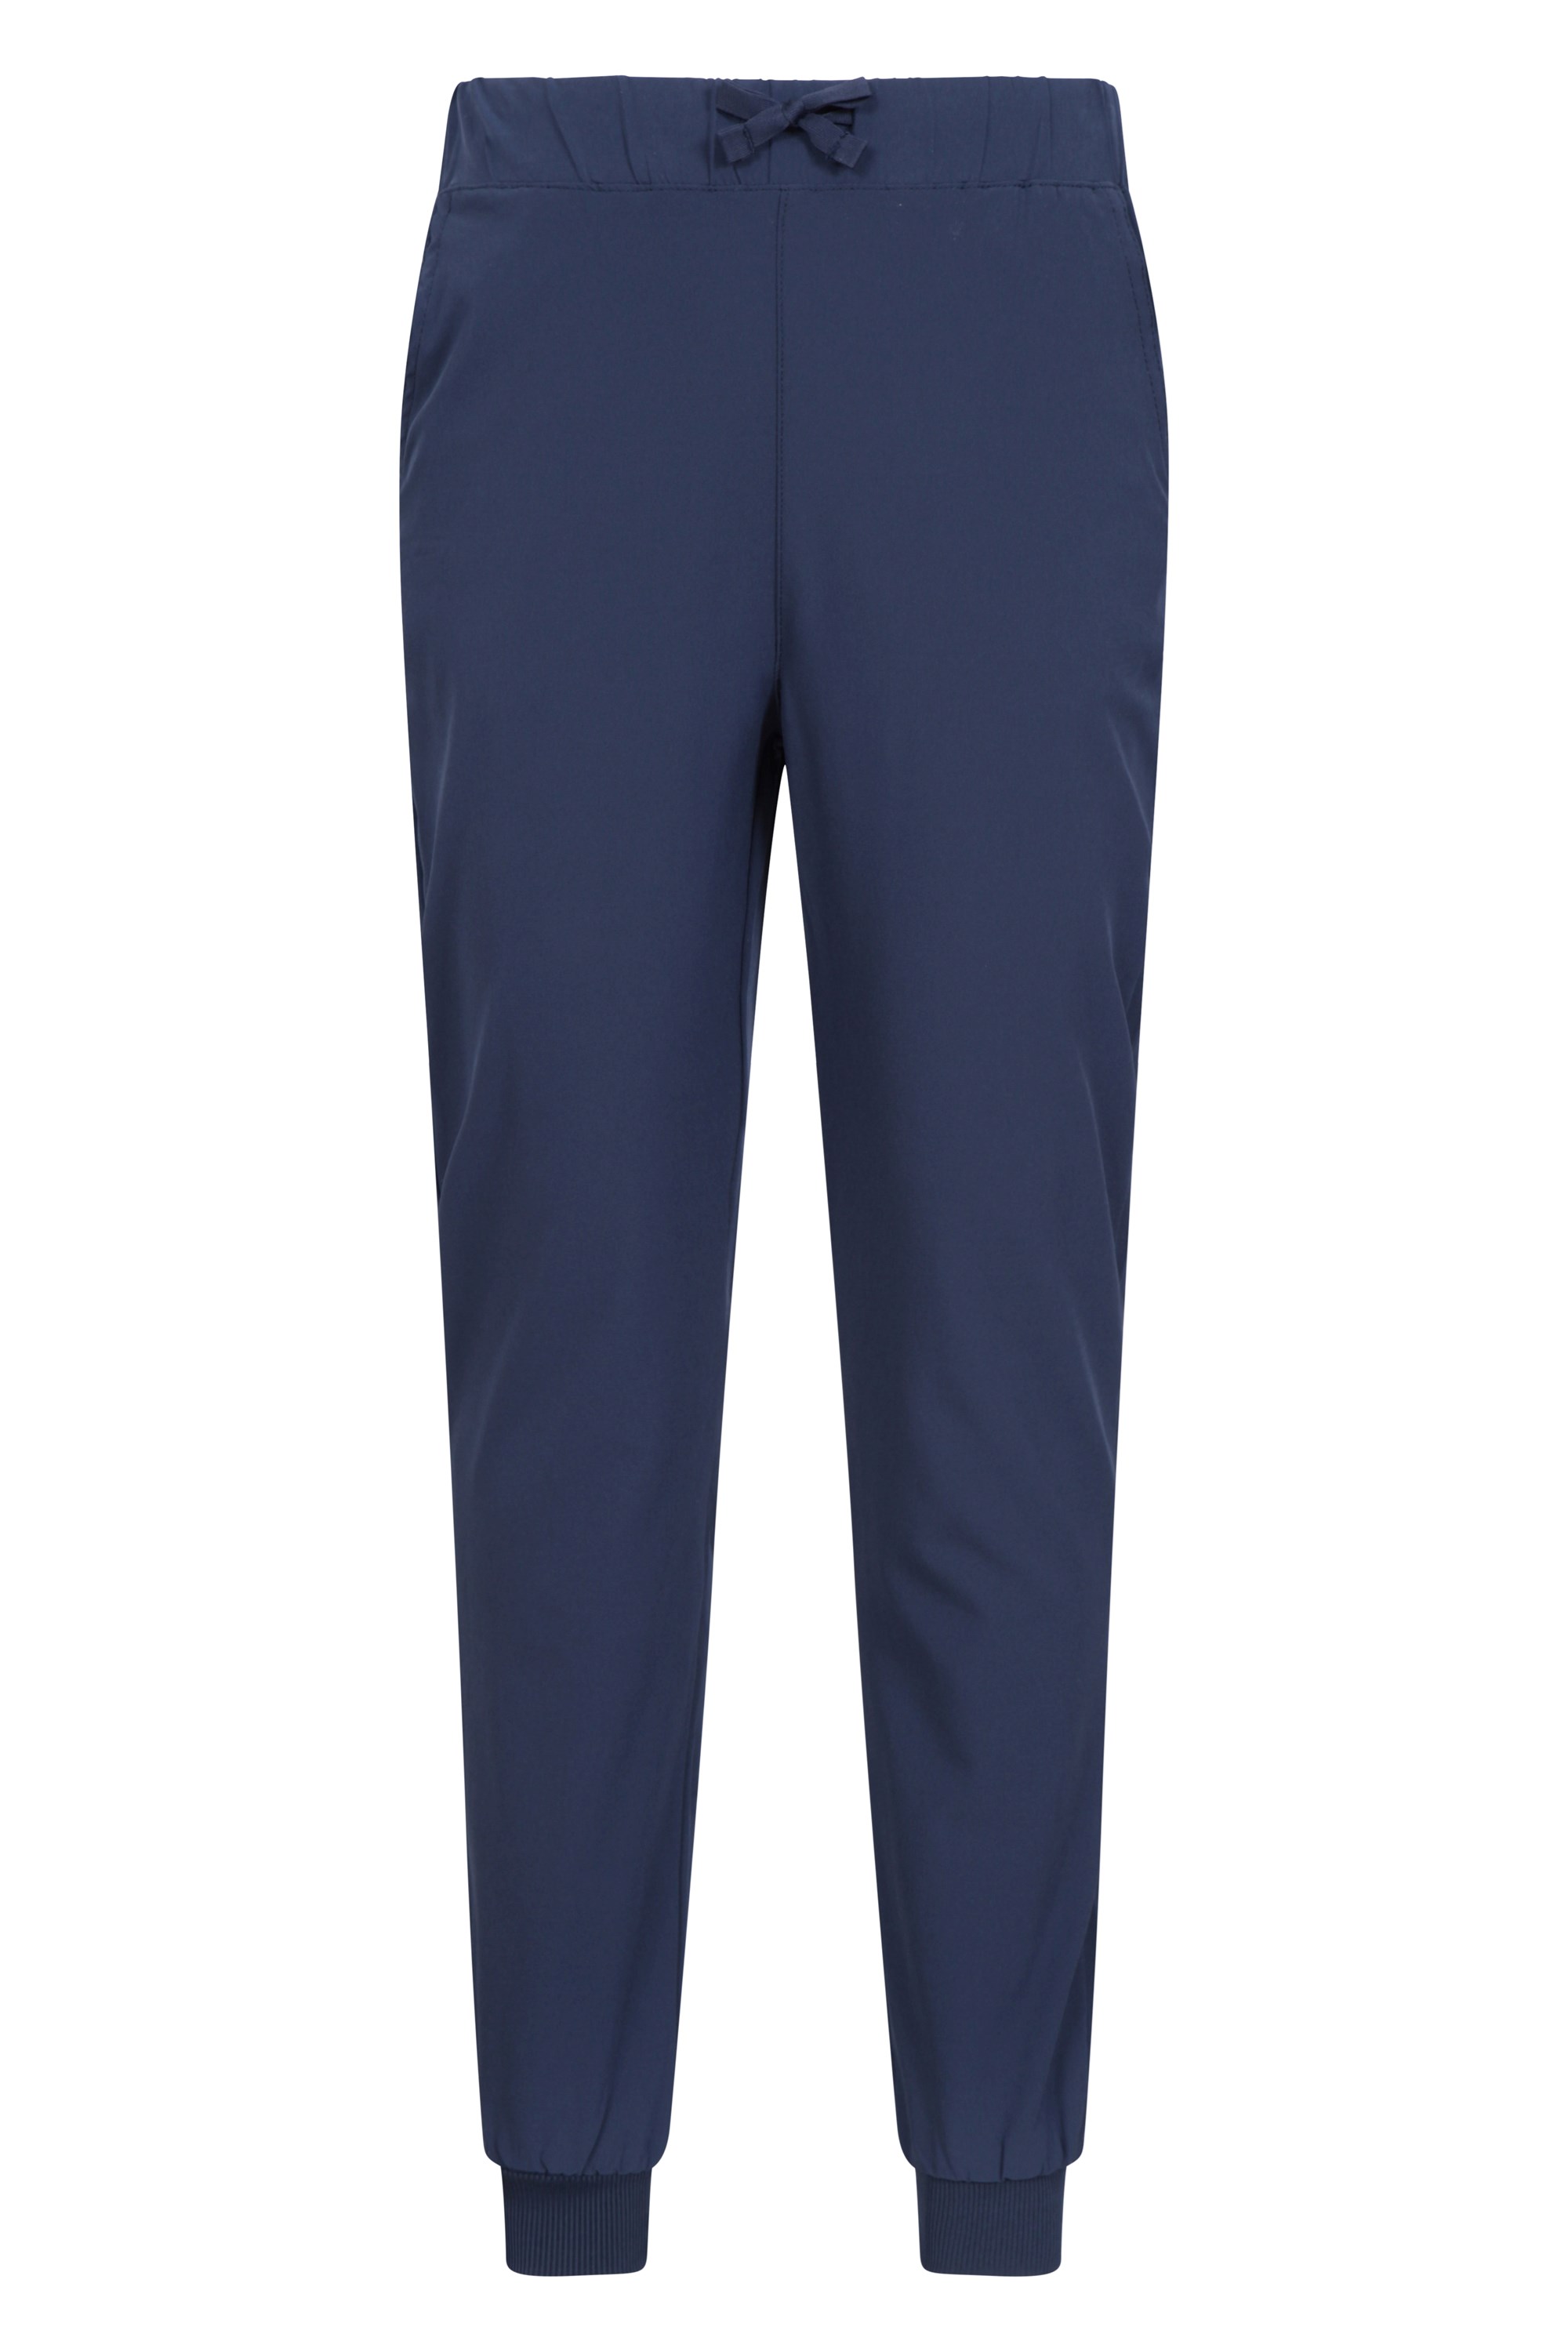 334LWT Lightweight Scrub Trousers by Work in Style